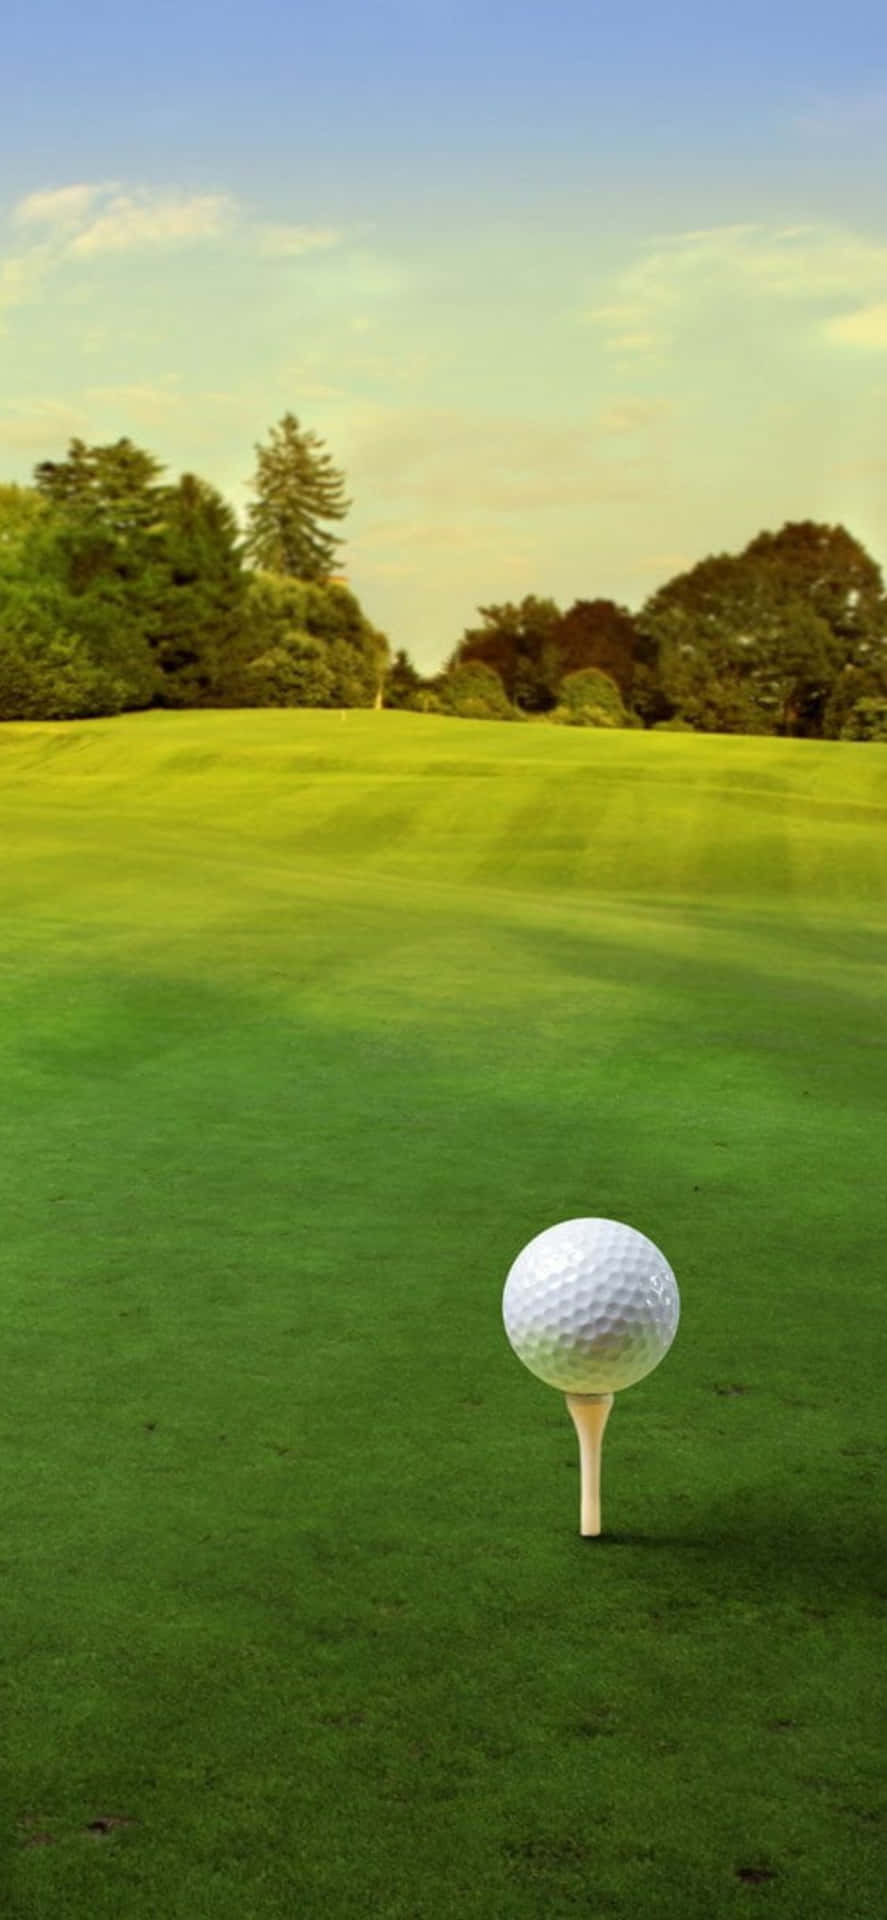 Get Ready to Hit the Links with Our Exclusive Iphone X Golf Course Background